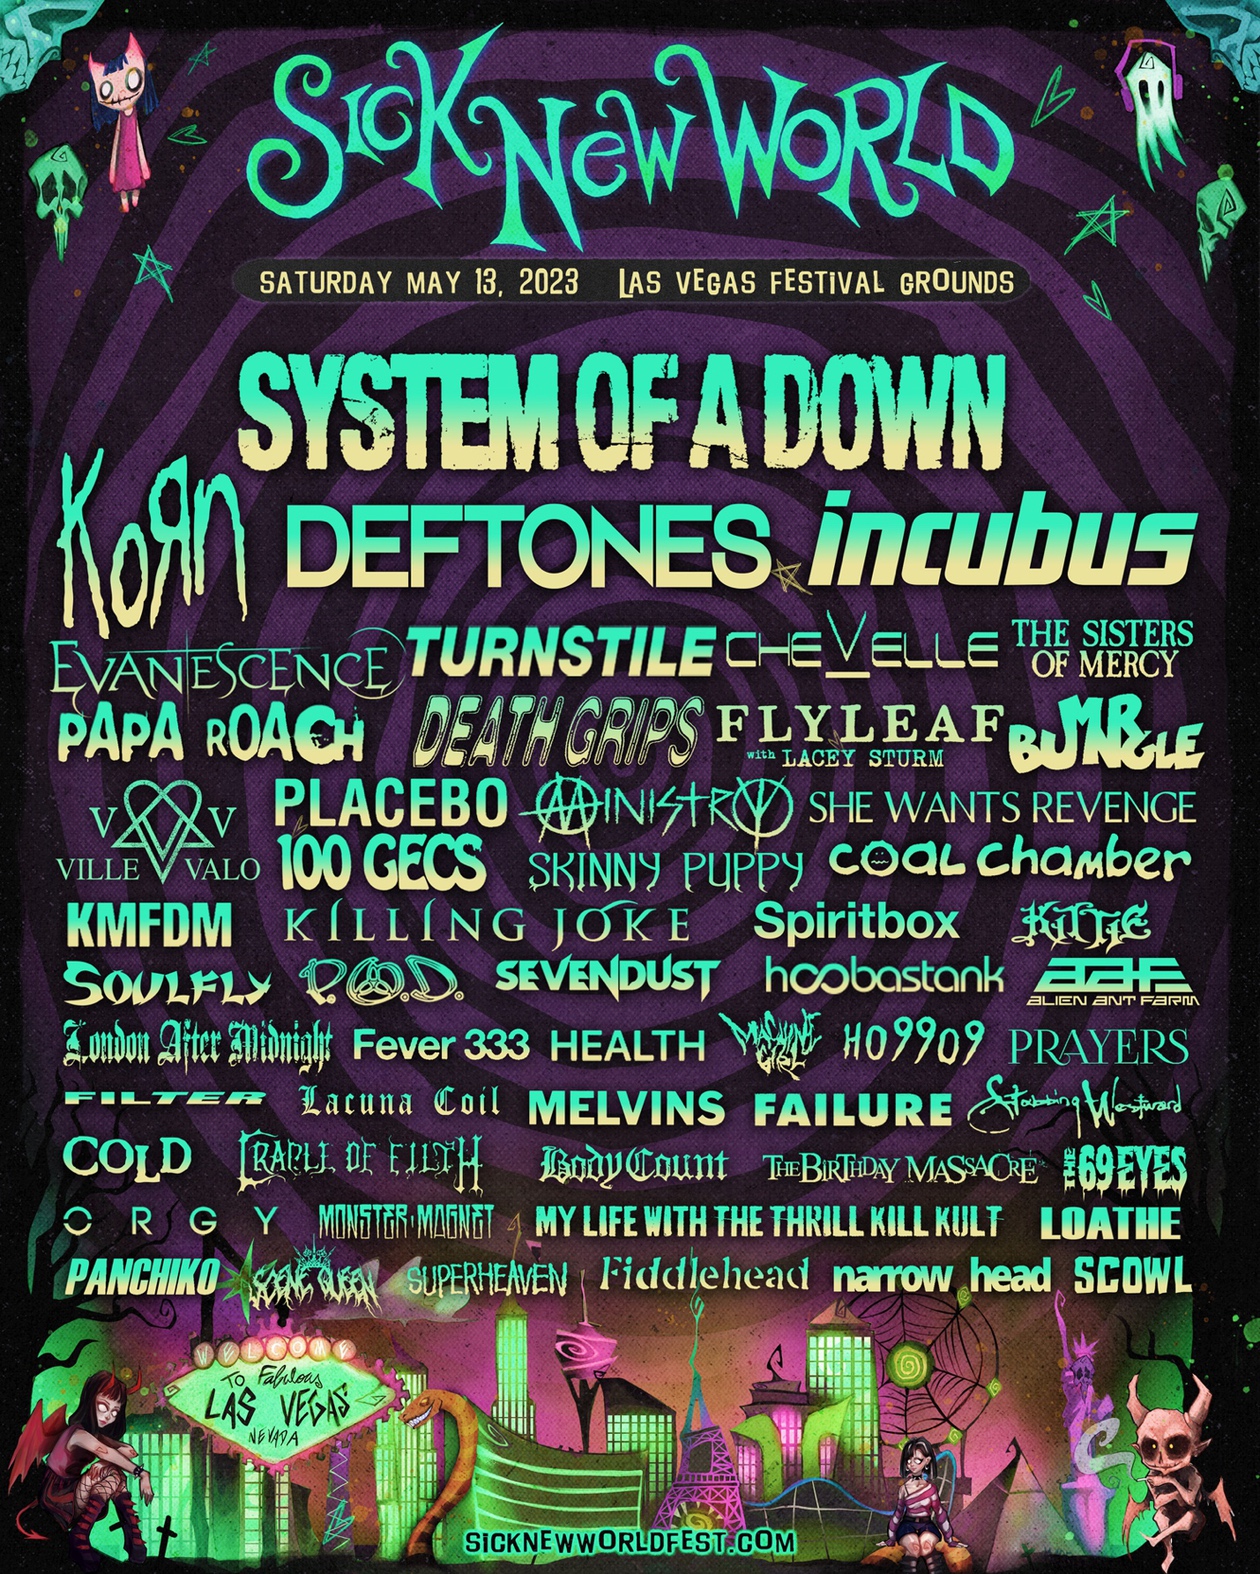 The hard rock-focused, one-day event will debut on May 13 at the Las Vegas Festival Grounds, featuring System of a Down, Korn, Deftones, Incubus and many more.